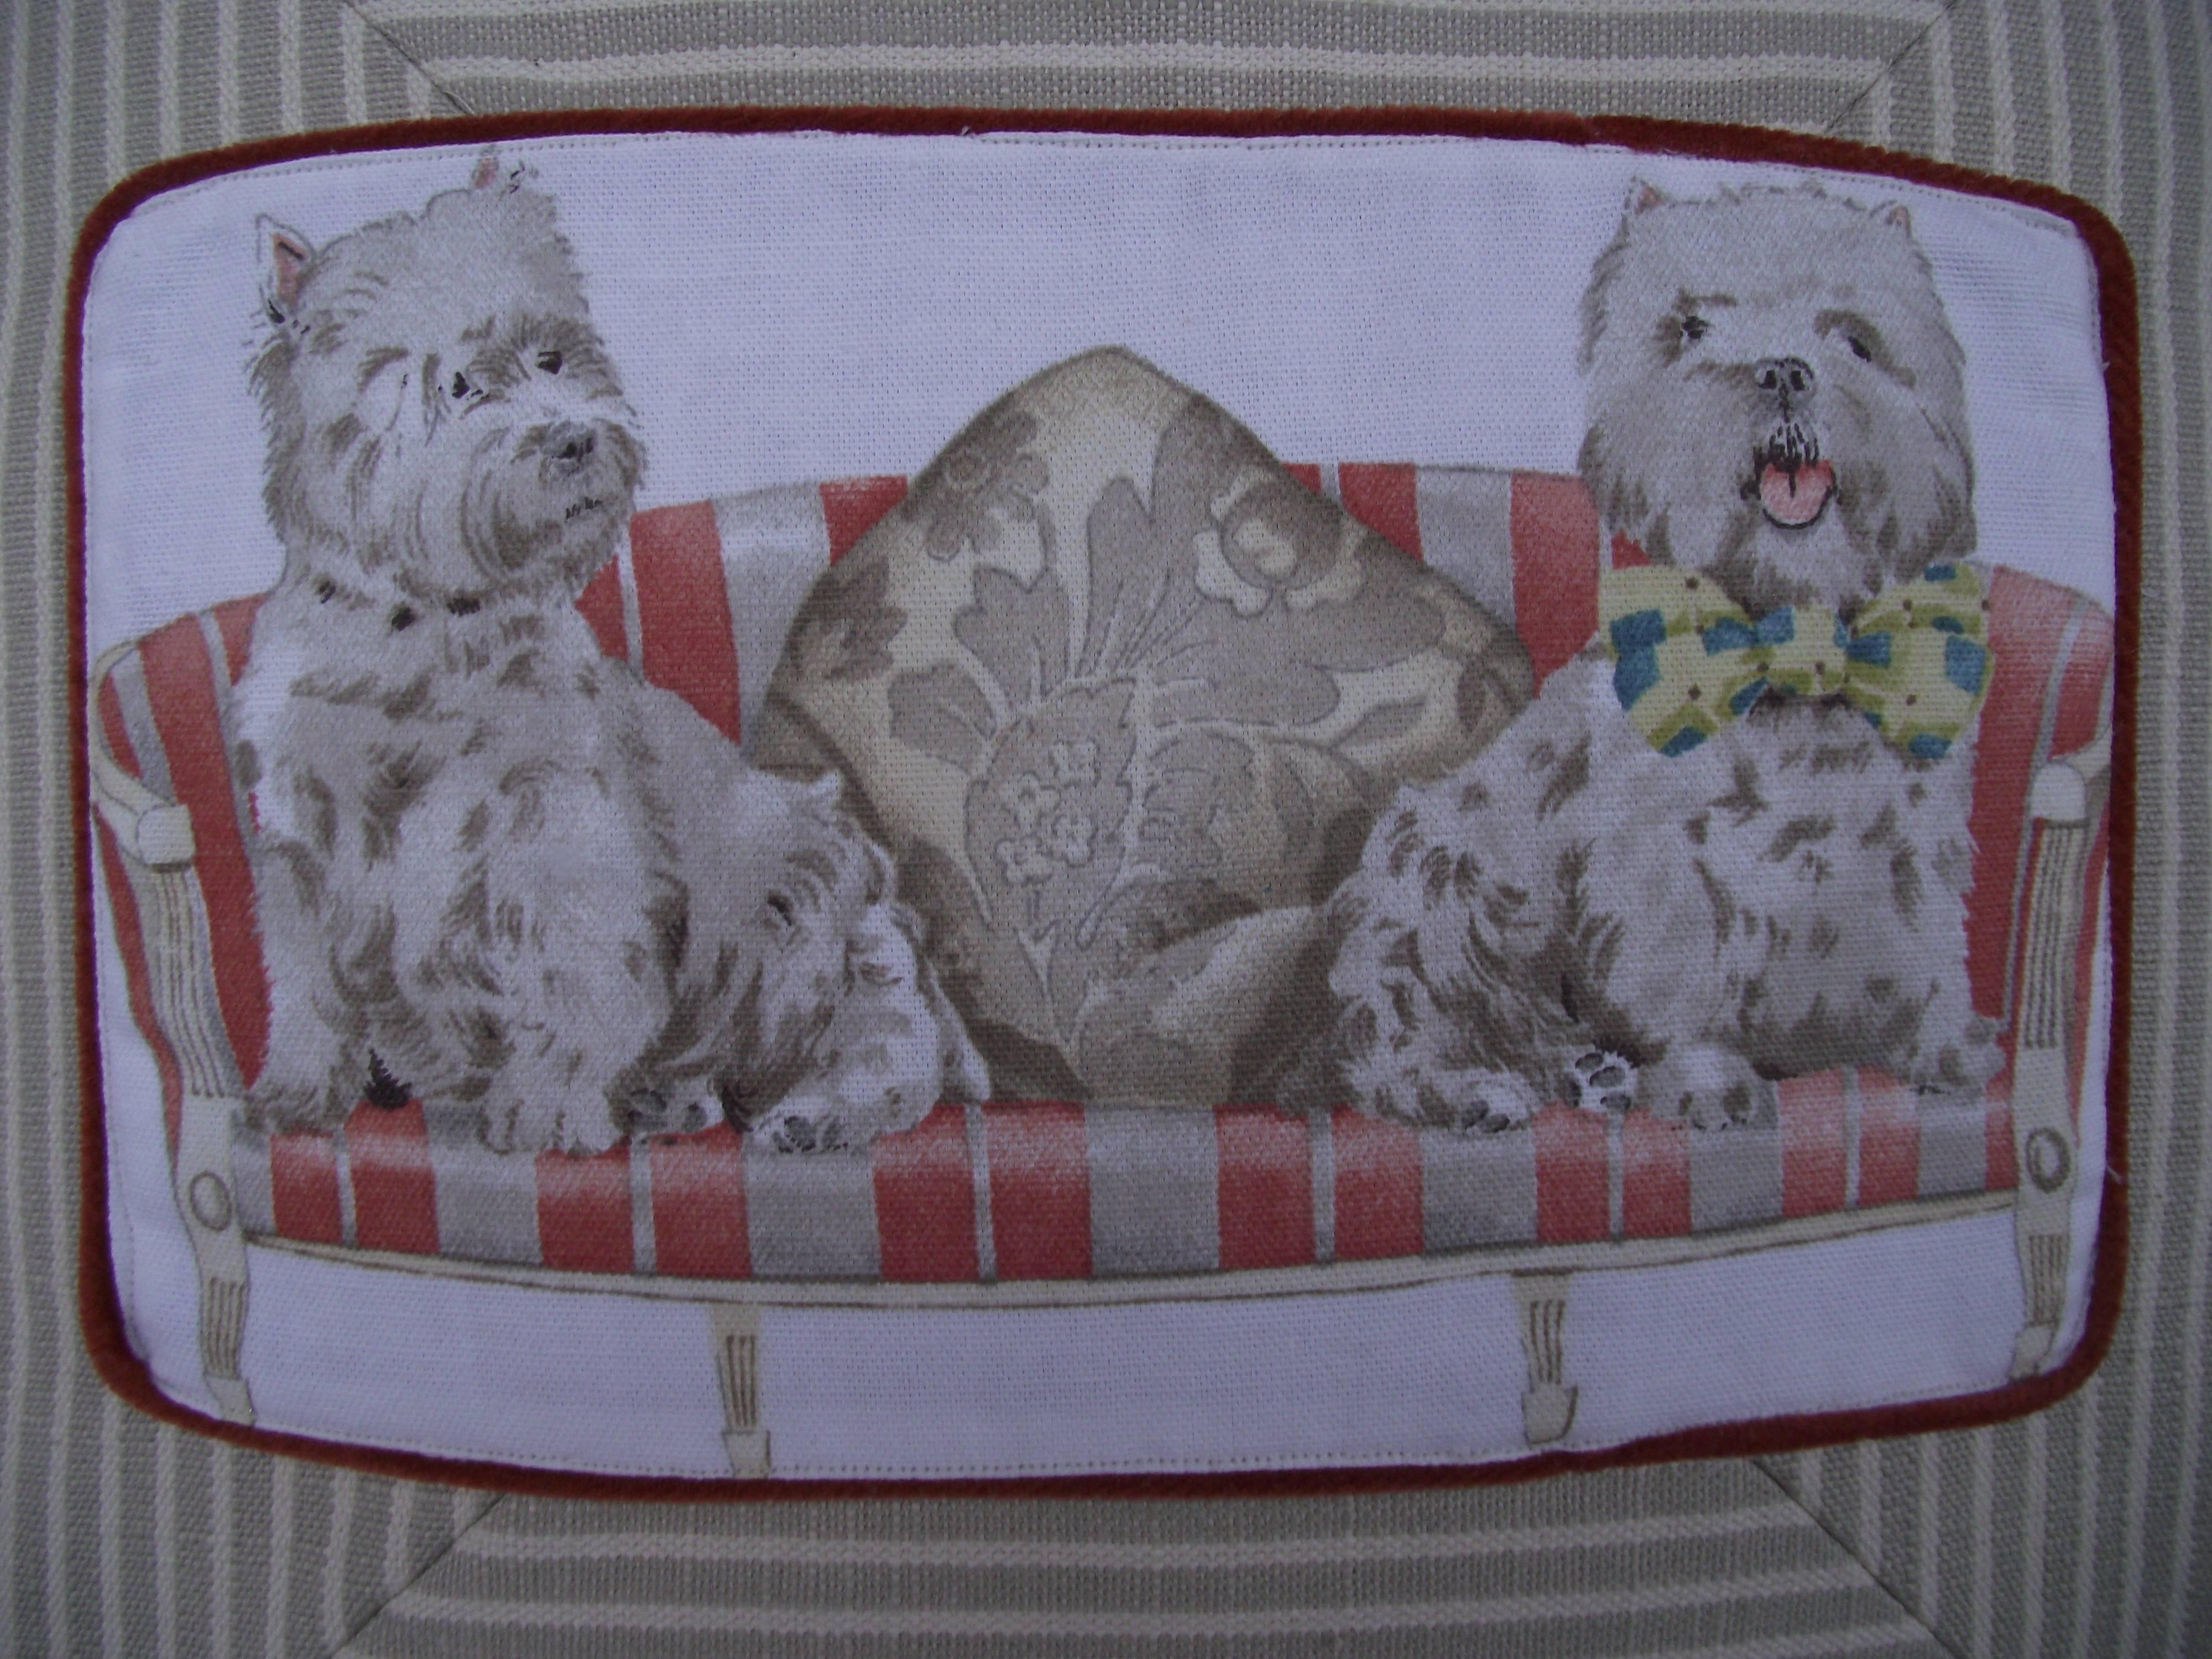 This charming pillow is made using a vintage novelty fabric by Robert Allen Fabrics . Each dog cameo is sewn onto an upholstery grade linen beige and white mitered stripe pillow. 

The pillow has a velcro closure at the bottom and covers a medium